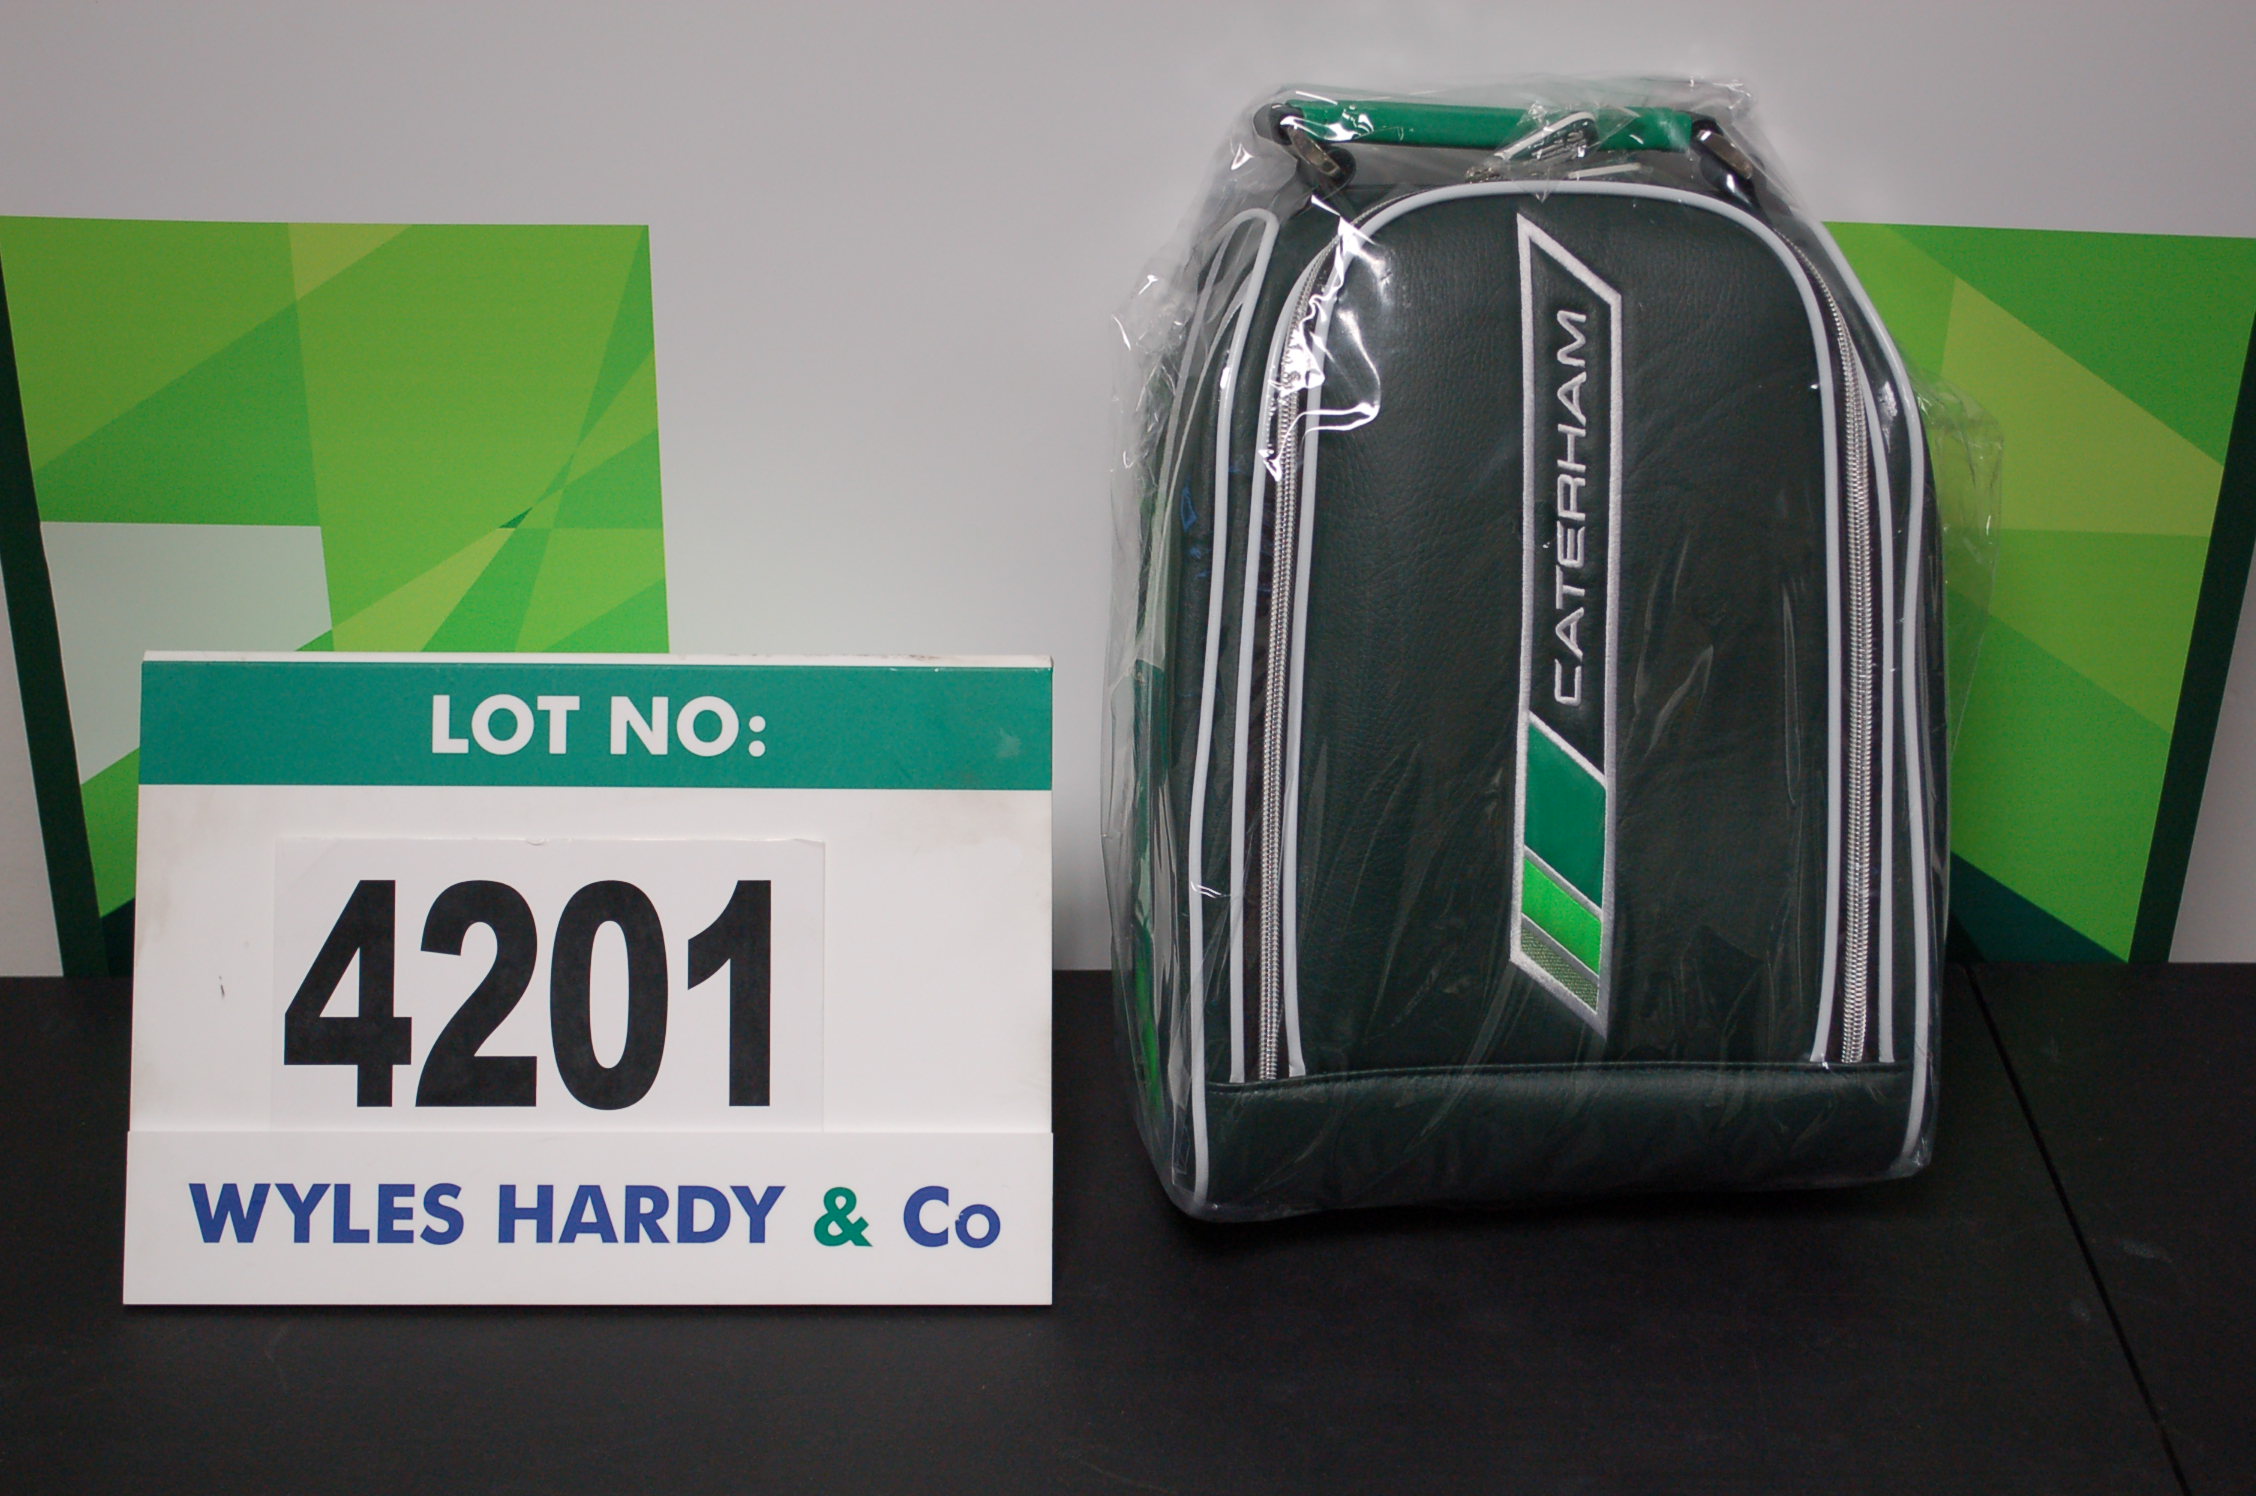 Twelve CATERHAM F1 Shoe Bags in Sealed Carton (Want it Shipped? http://bit.ly/1wIhCEv)